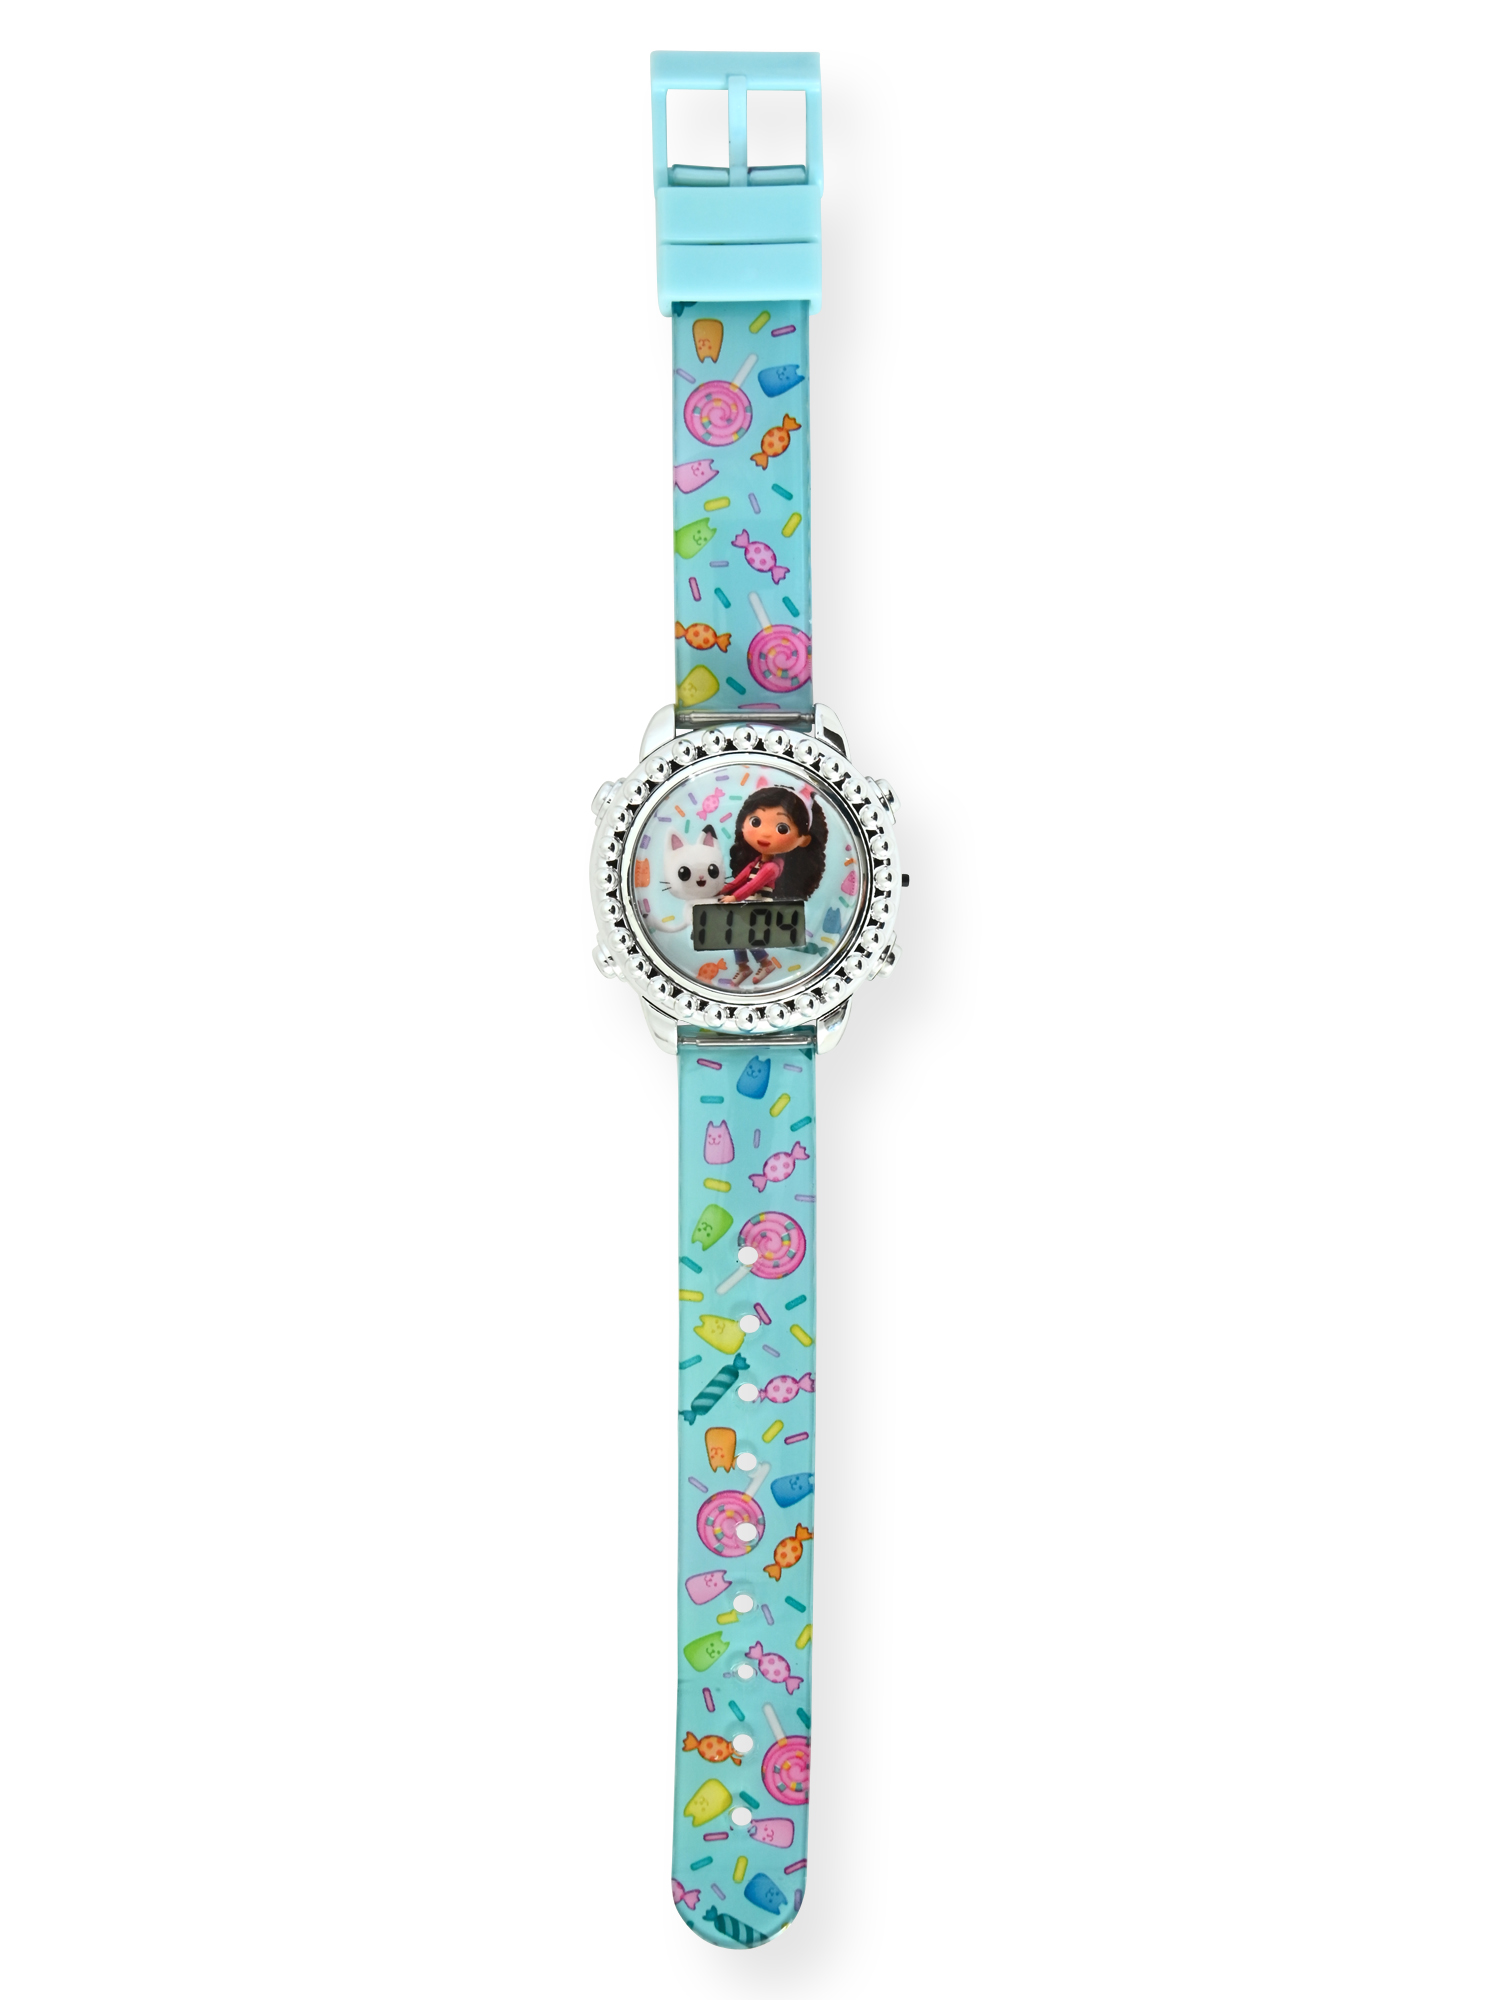 GAB4048WM Gabby Kids Molded Case Flashing Lights LCD Watch with Printed Strap - image 2 of 3